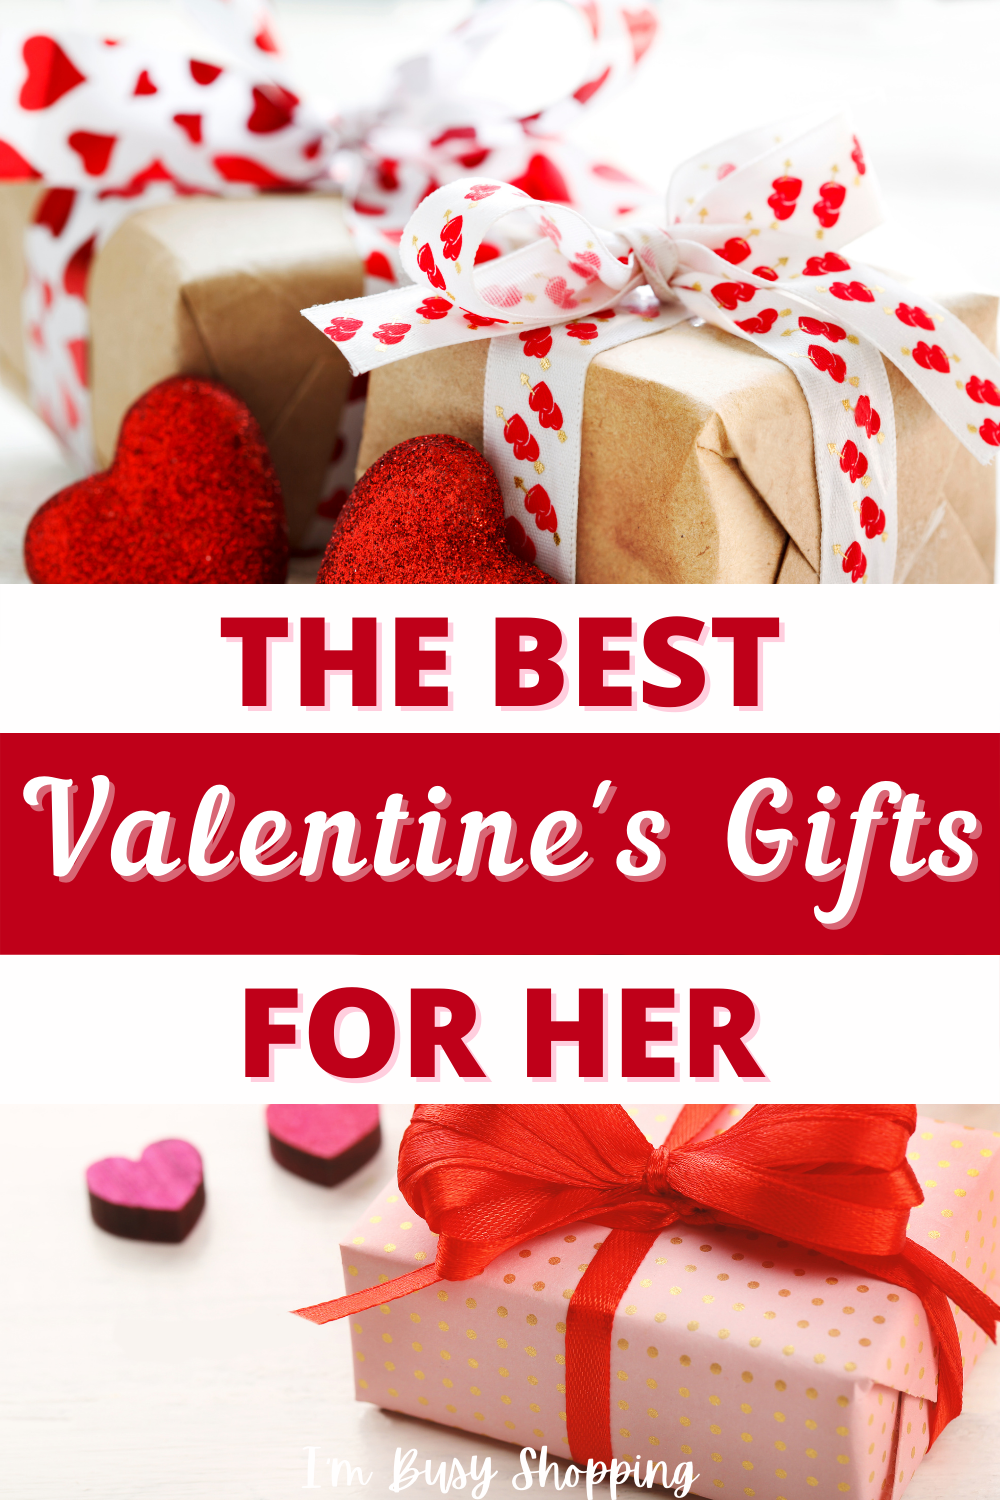 Pin showing the Best Valentine's Gifts for Her